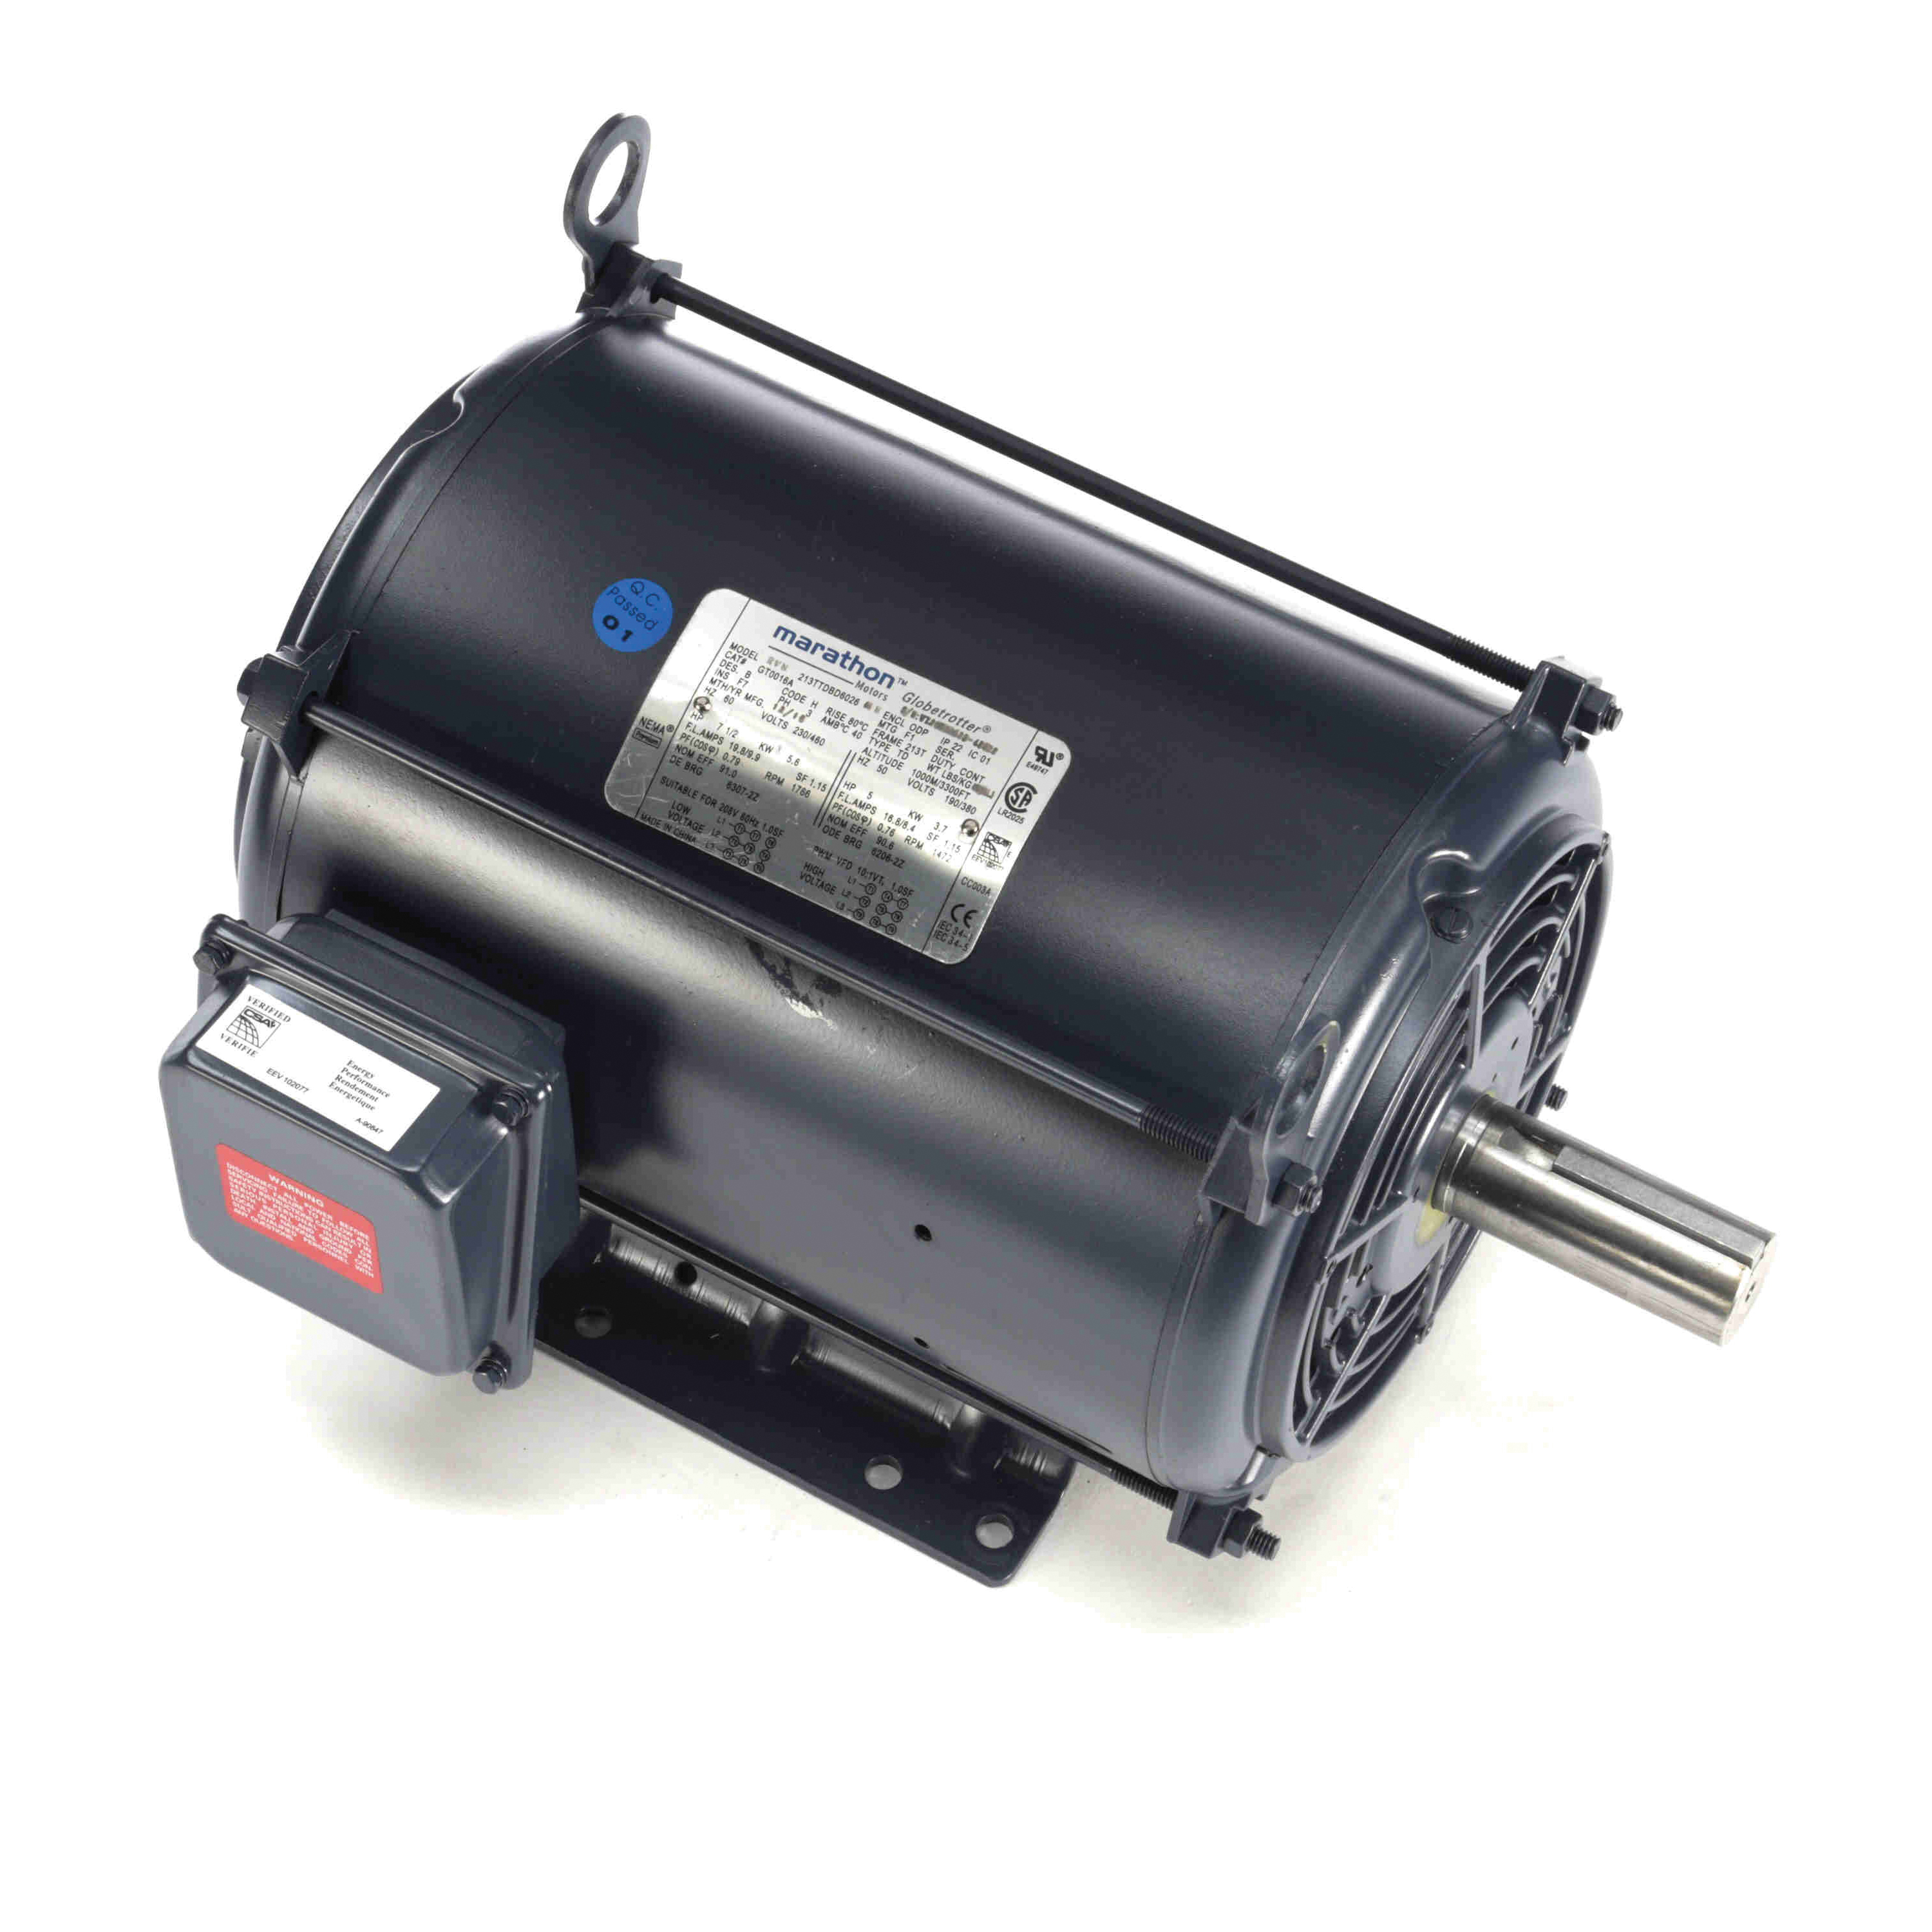 Marathon® Globetrotter® GT0016A General Purpose Motor, 208 to 230/460 V, 9.9/19.8 to 21.2 A, 5.6 kW, 7-1/2 hp